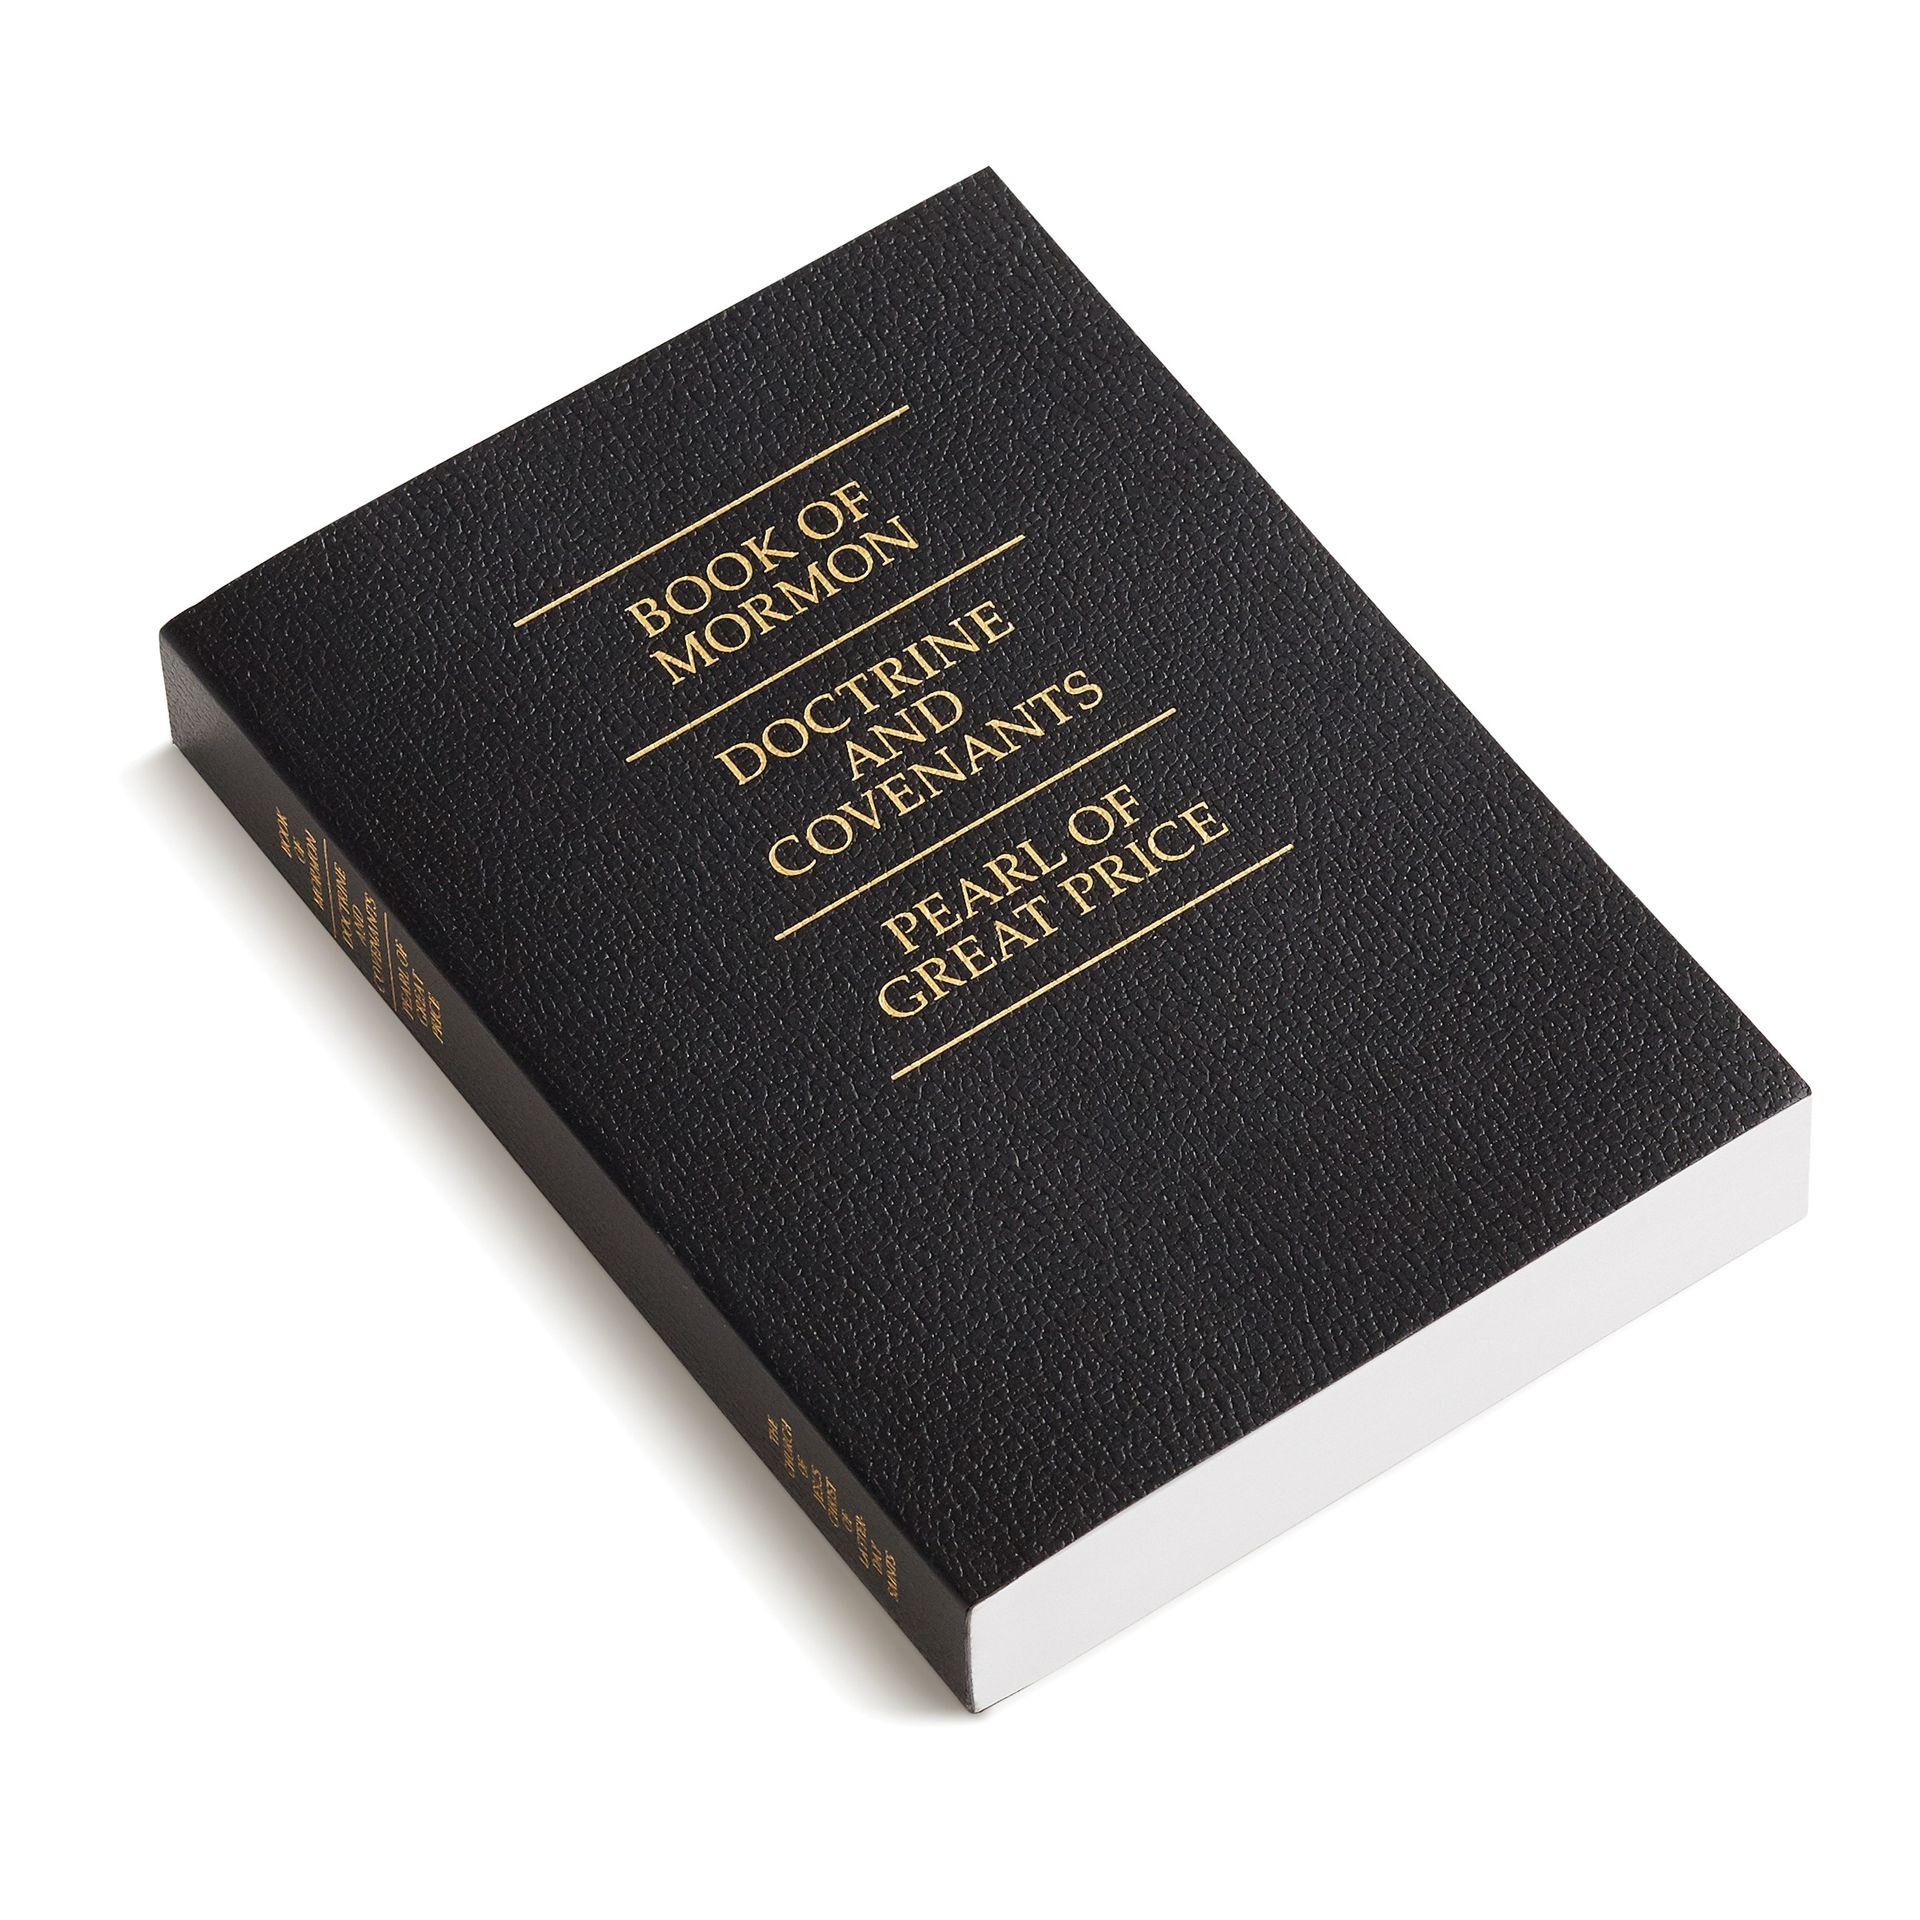 A softcover triple combination with gold text.